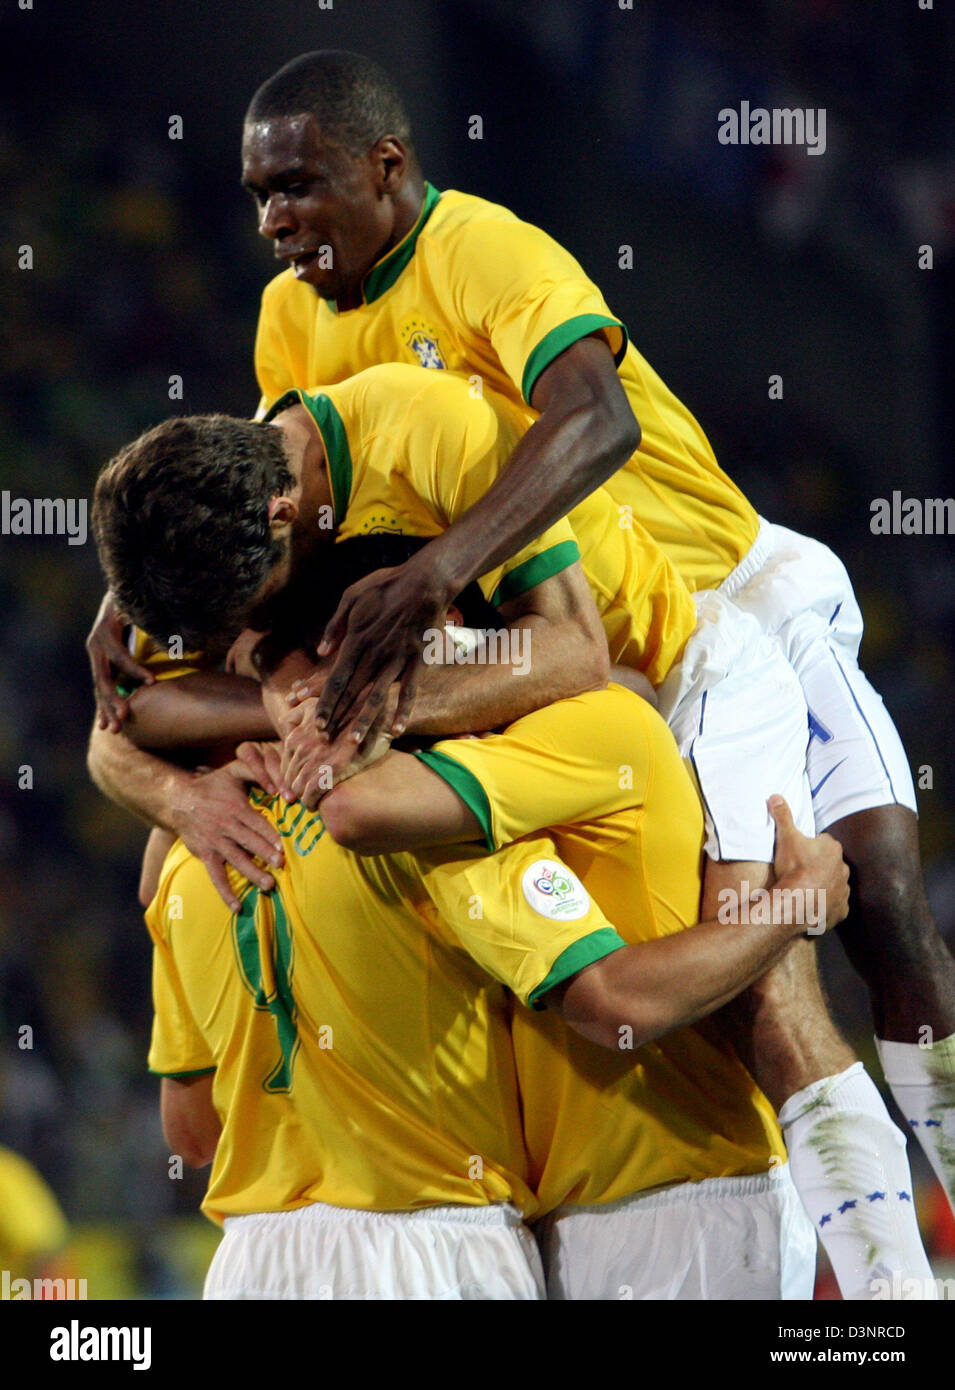 Ronaldo (L) from Brazil celebrates with is teammates Kaka, Juninho Pernambucano and Juan (L-R) after scoring the 1-1 draw during the group F match of 2006 FIFA World Cup between Japan and Brazil in Dortmund, Germany, Thursday, 22 June, 2006. DPA/ACHIM SCHEIDEMANN +++ Mobile Services OUT +++ Please refer to FIFA's Terms and Conditions. Stock Photo